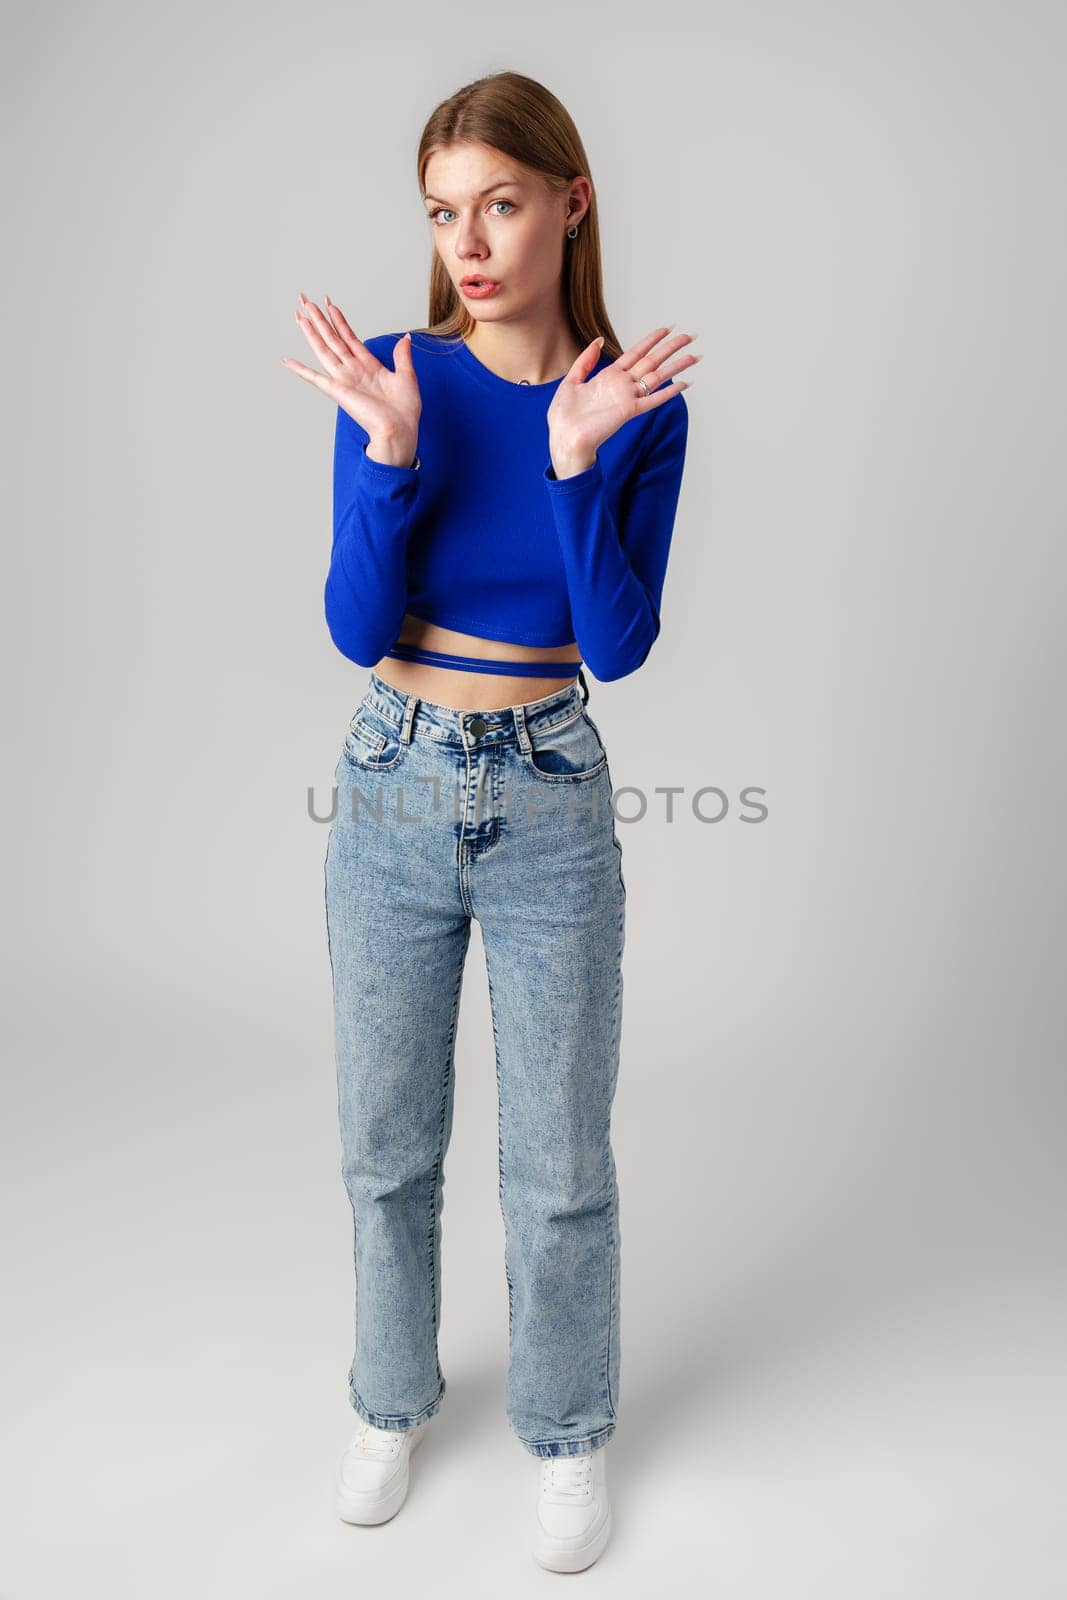 Young Woman in Blue Top Holding Out Hands in studio